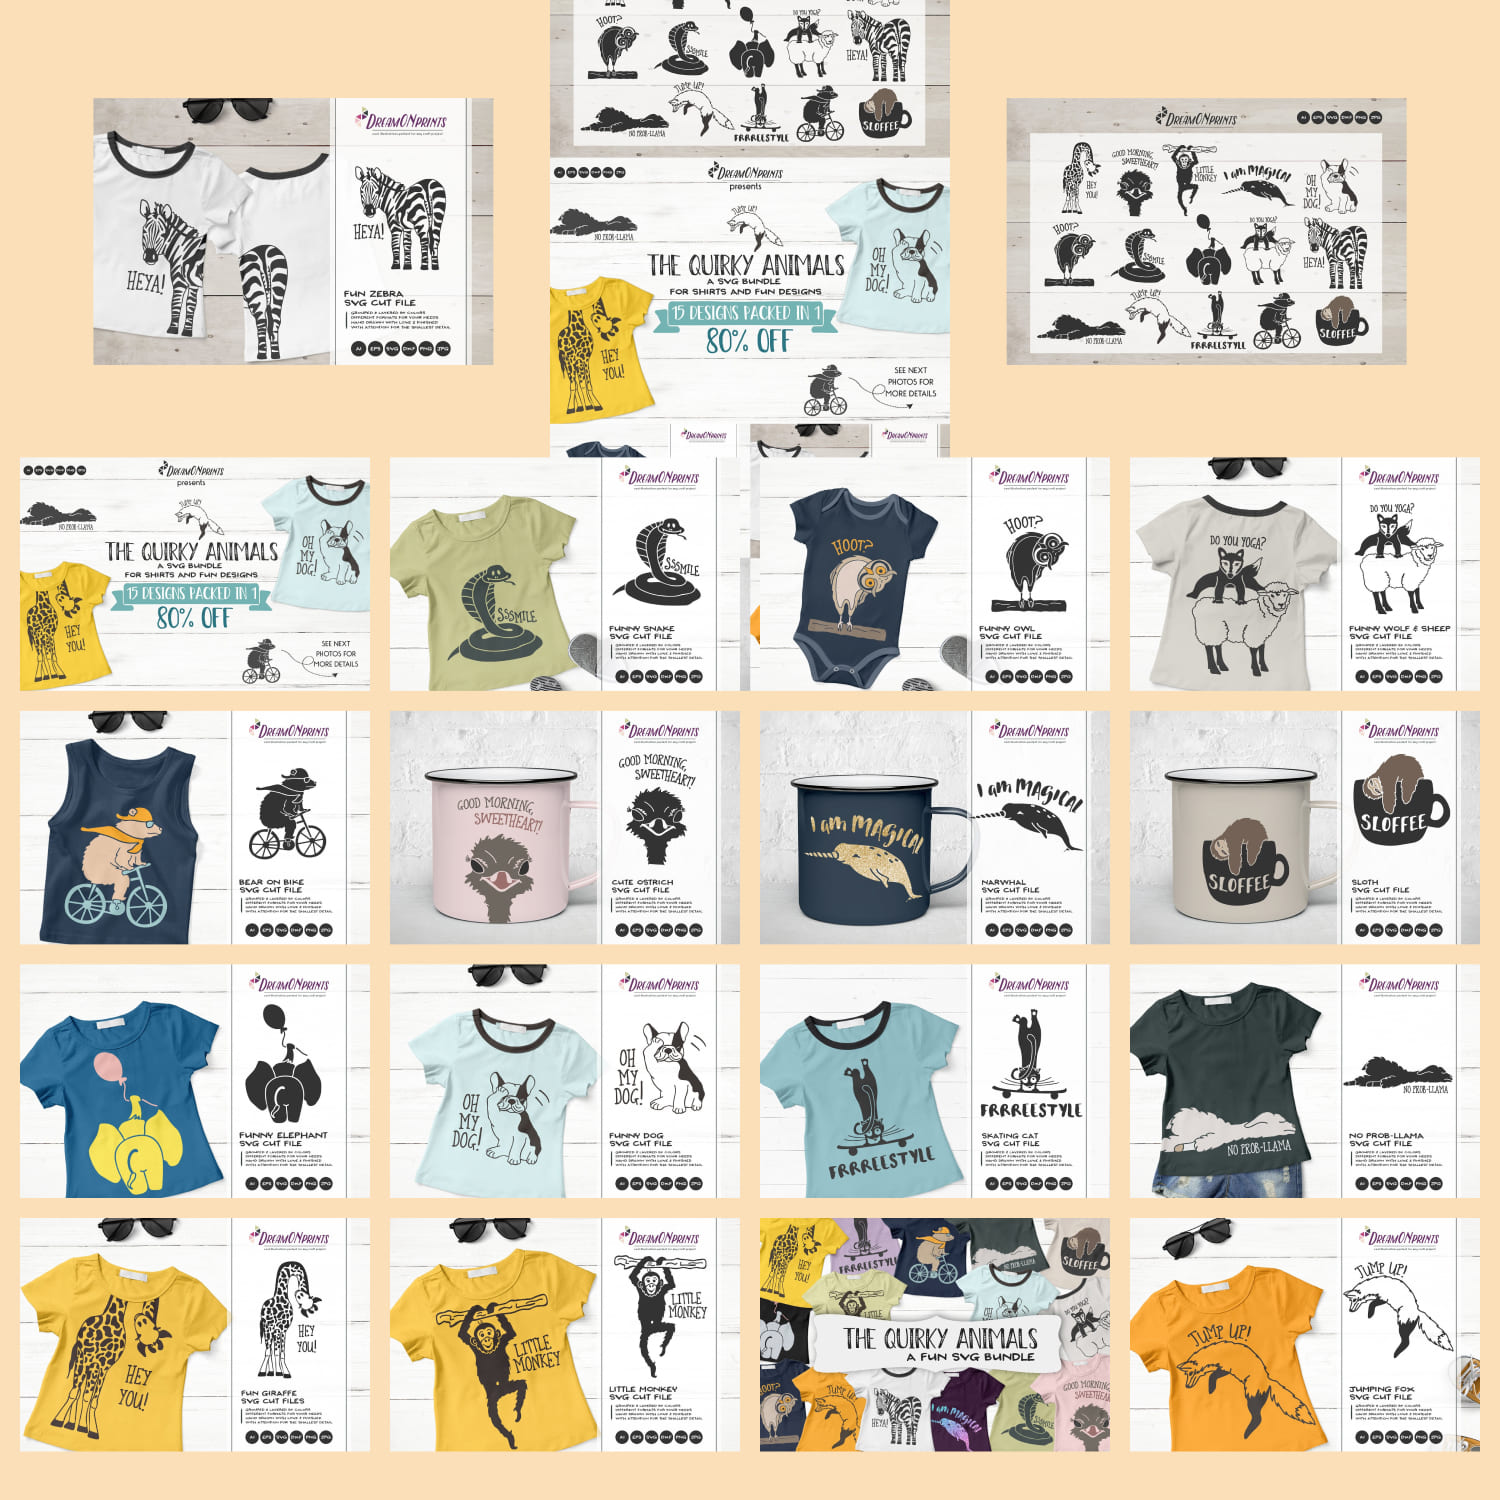 Collage of t - shirts with different designs on them.